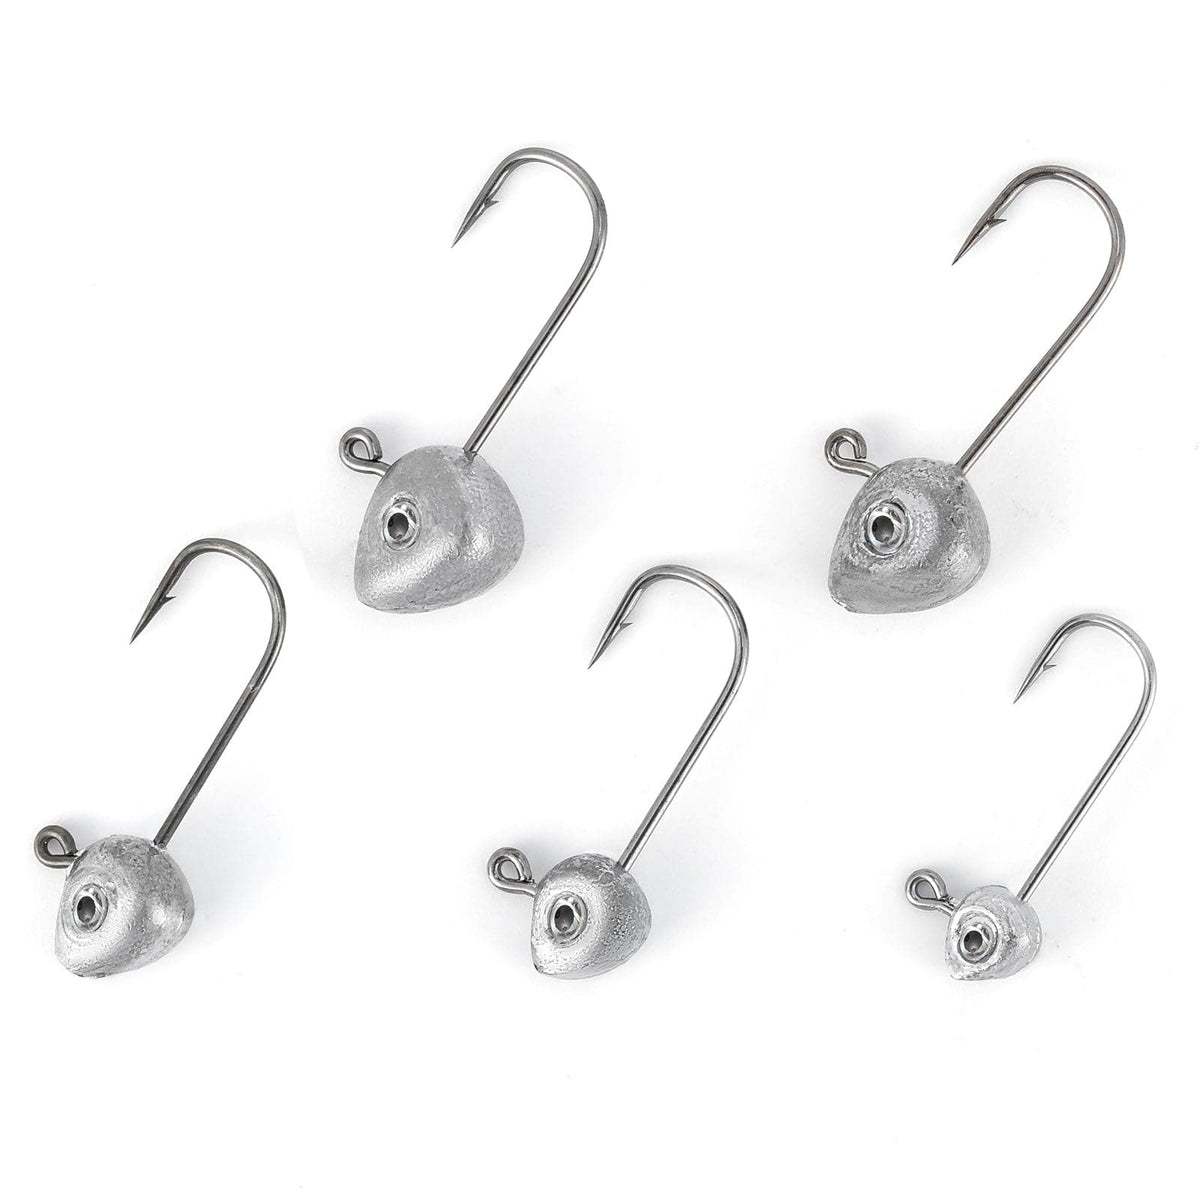 1/8 Oz Round Jig Heads Unpainted 30 Pack 2/0 Eagle Claw Hook – Contino